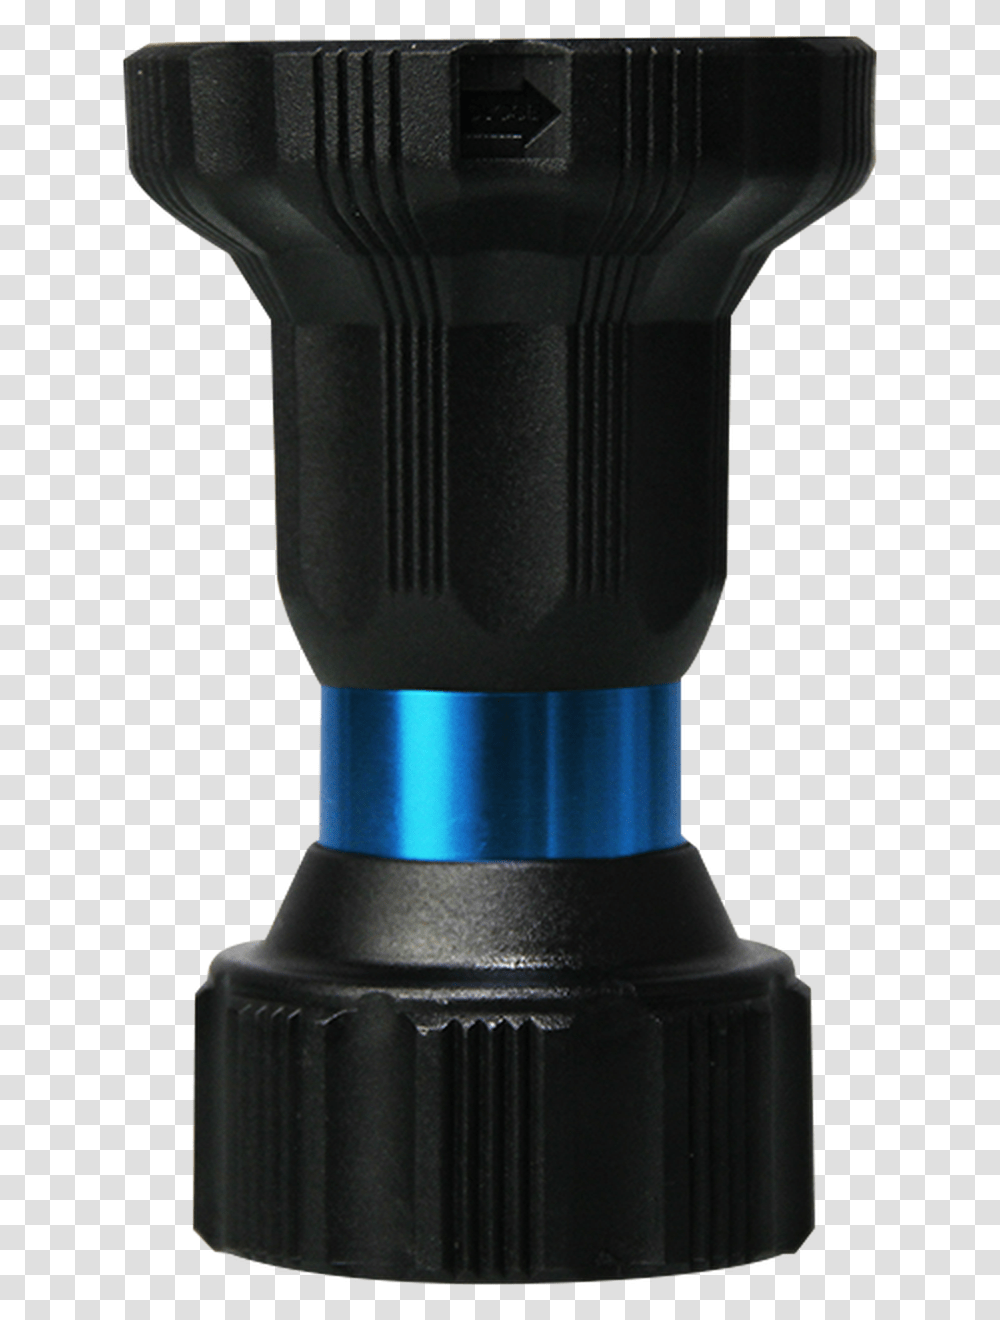 Ultimate Fire Hose Nozzle Solid, Flashlight, Lamp, Electronics, Meal Transparent Png